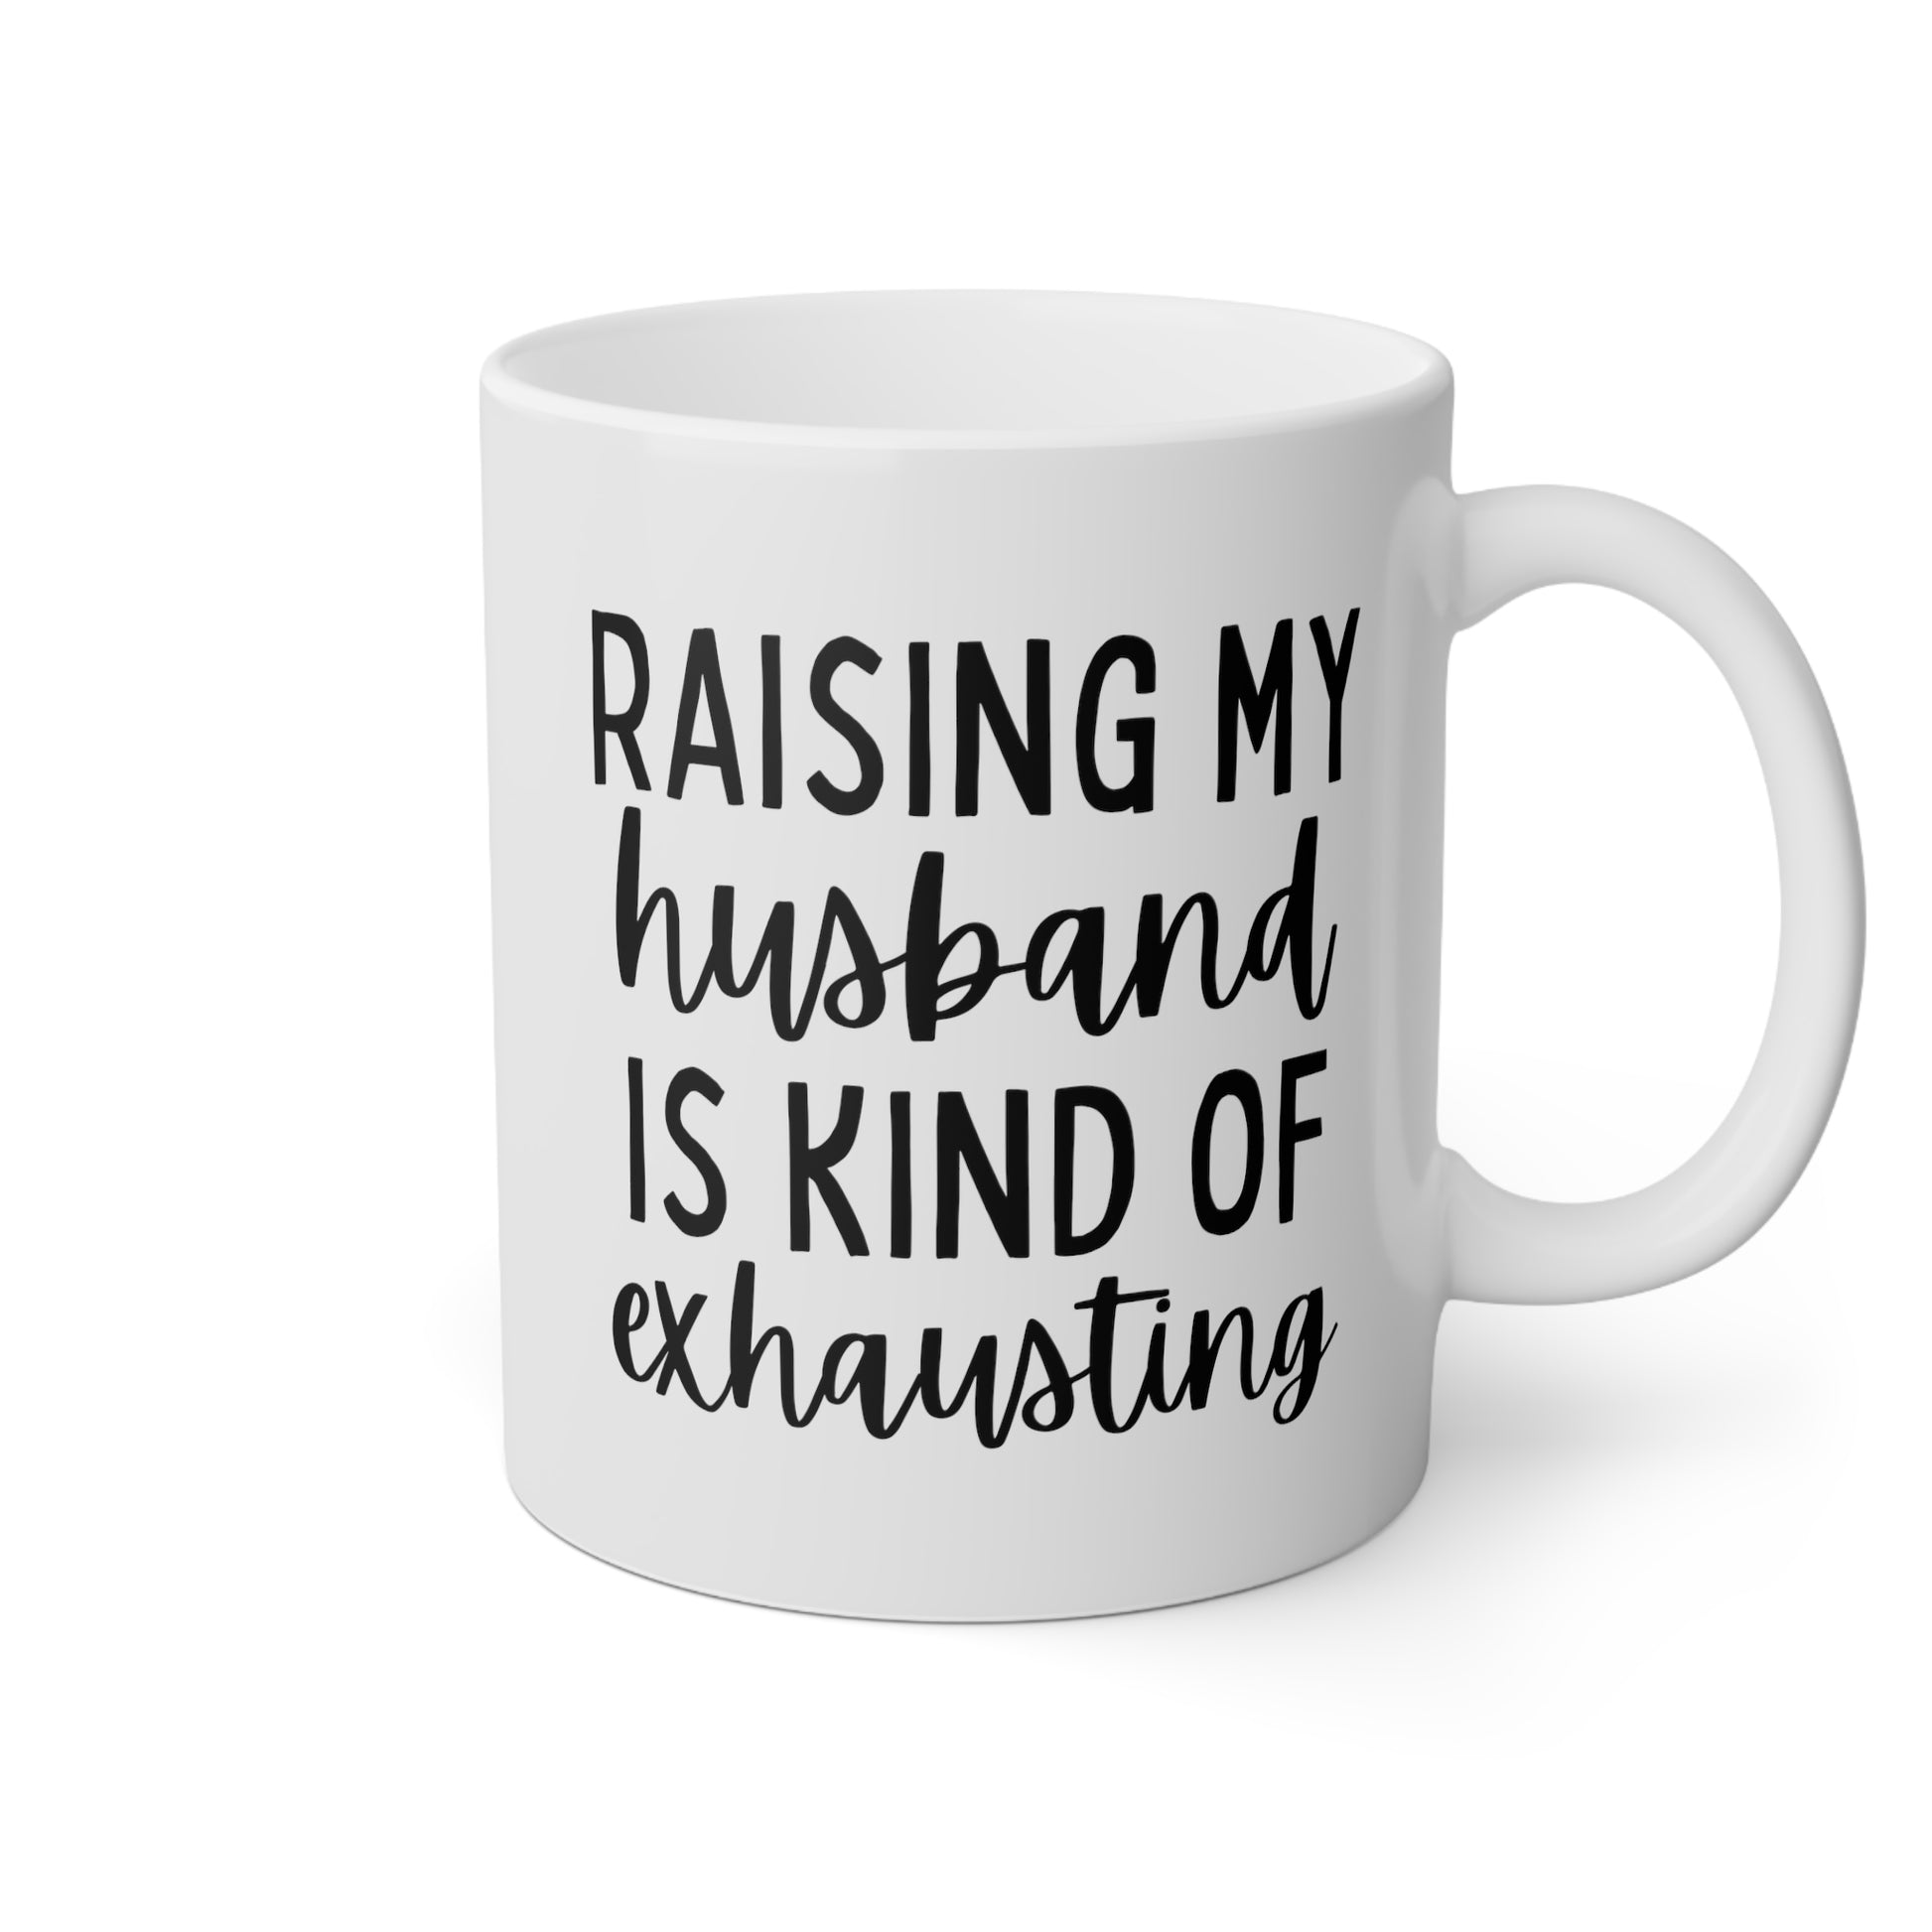 Raising My Husband is Kind of Exhausting 11oz white funny large coffee mug gift for wife mom bestie best friend sarcastic quote waveywares wavey wares wavywares wavy wares